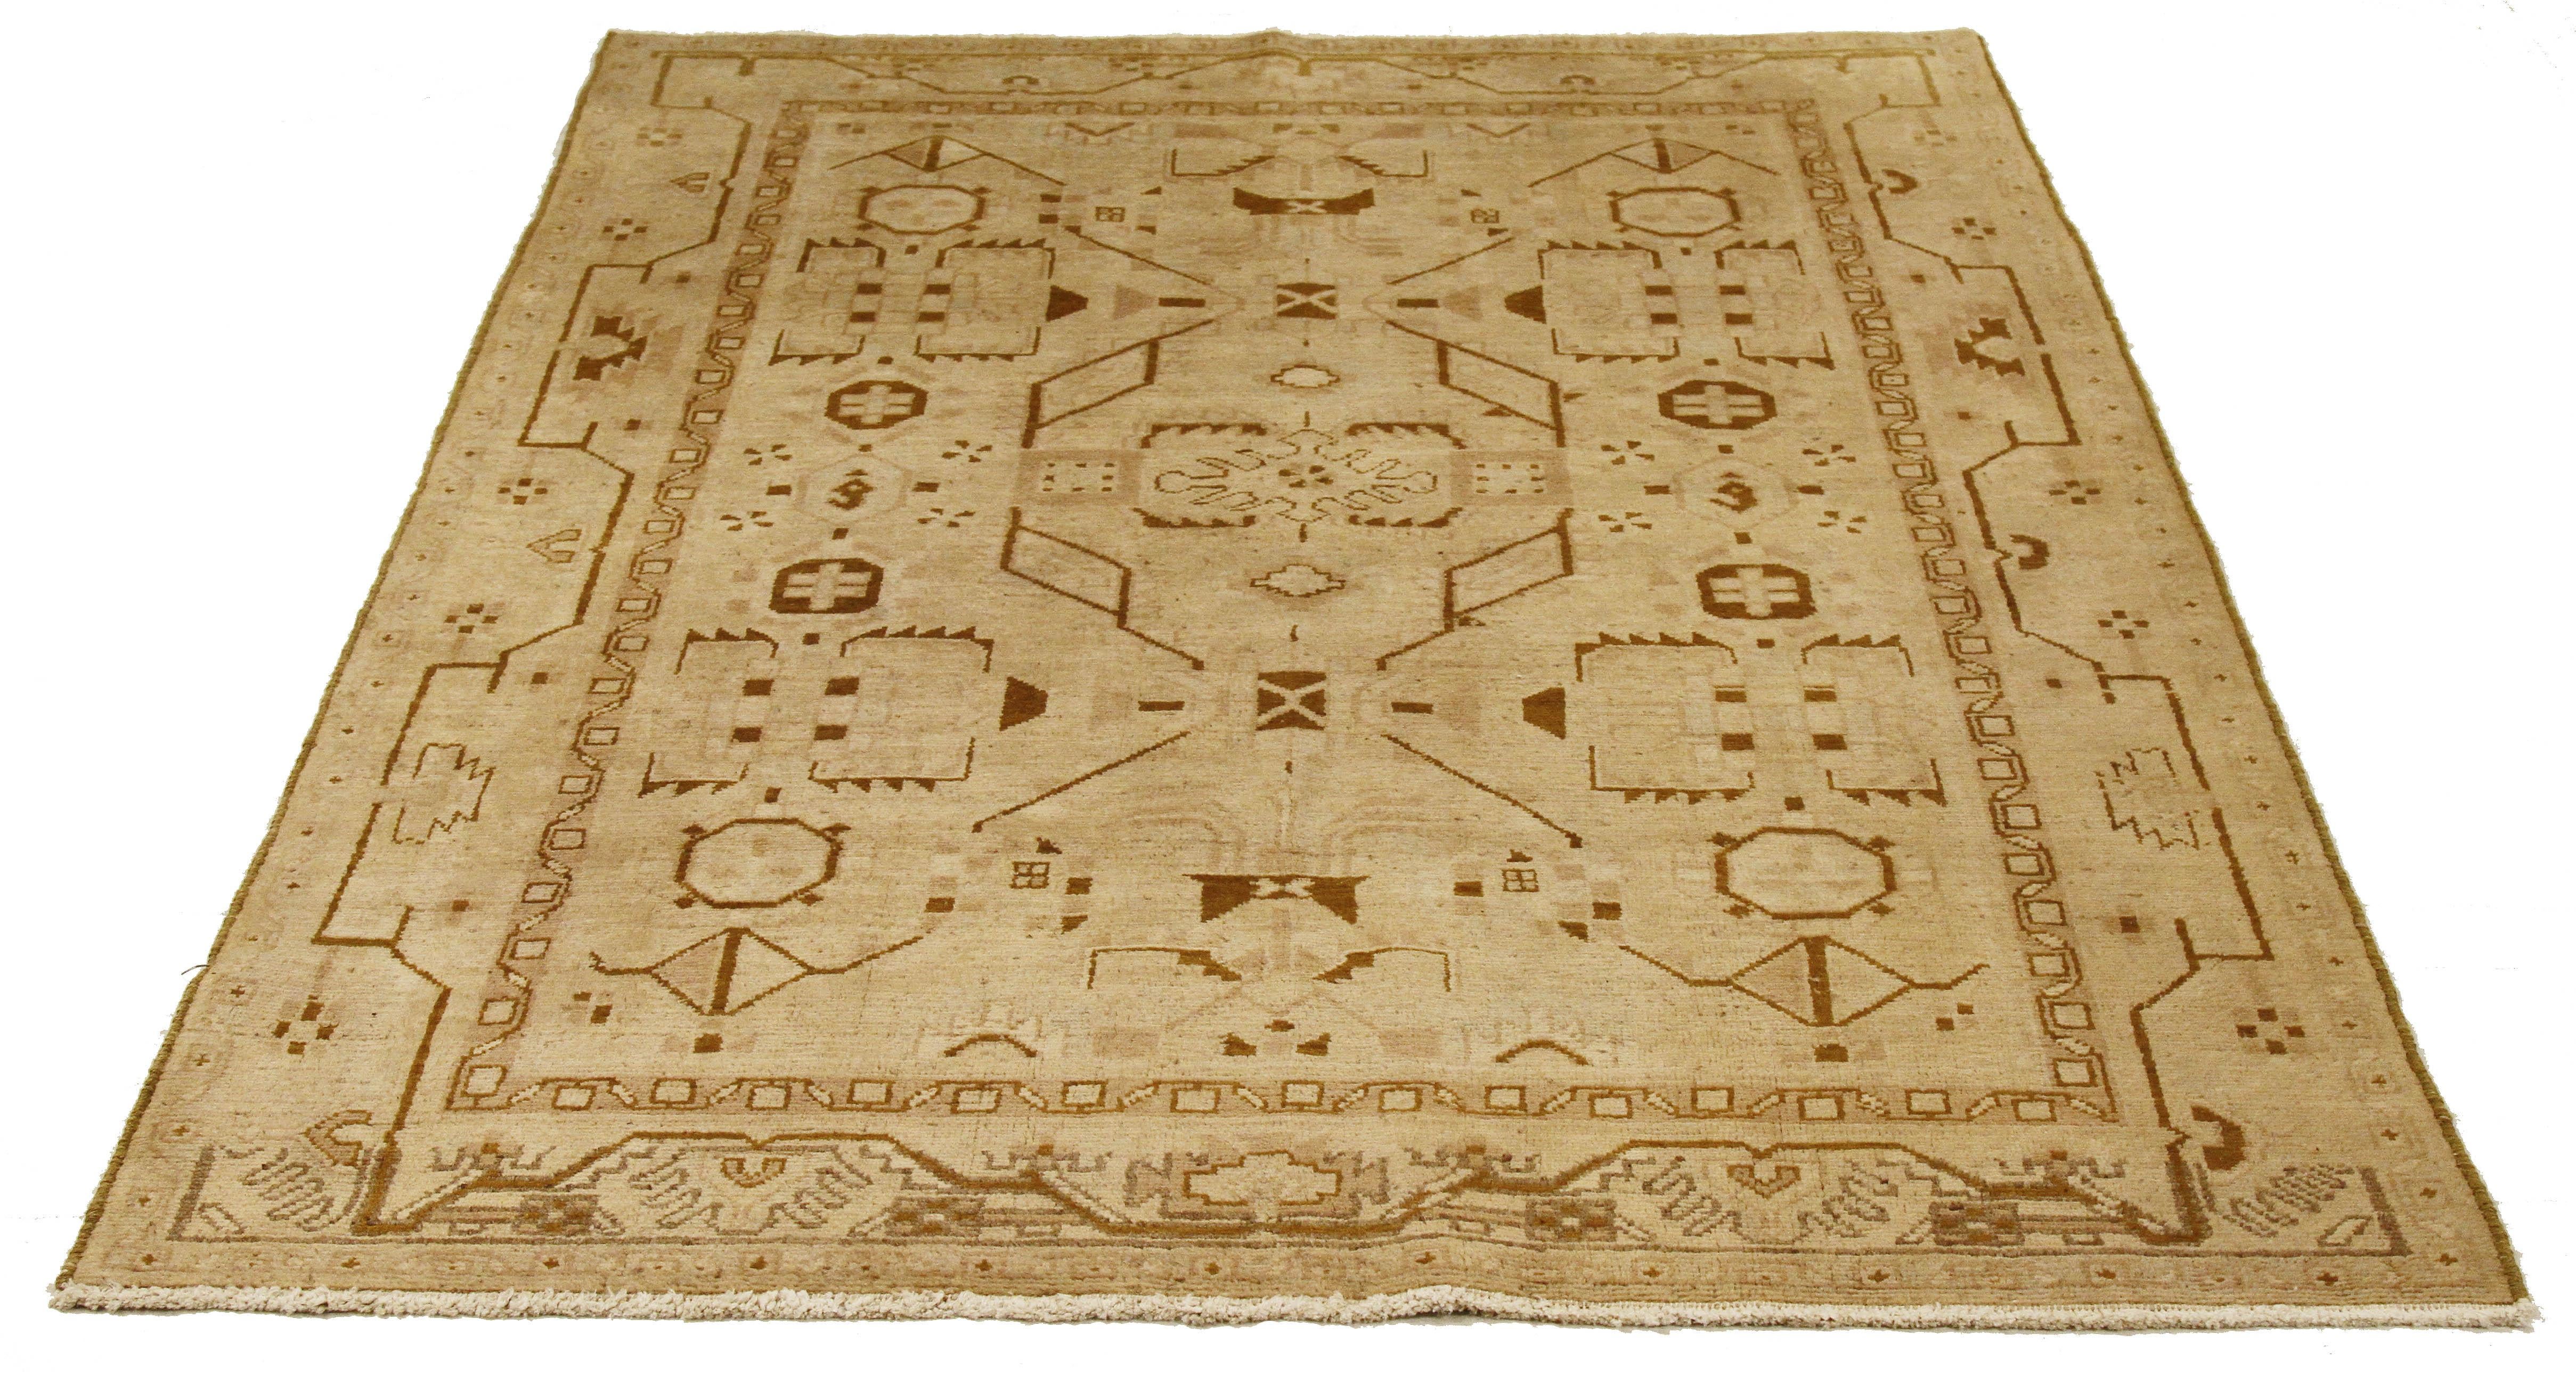 Antique Persian runner rug handwoven from the finest sheep’s wool and colored with all-natural vegetable dyes that are safe for humans and pets. It’s a traditional Malayer design featuring brown geometric and tribal details over an ivory field. It’s